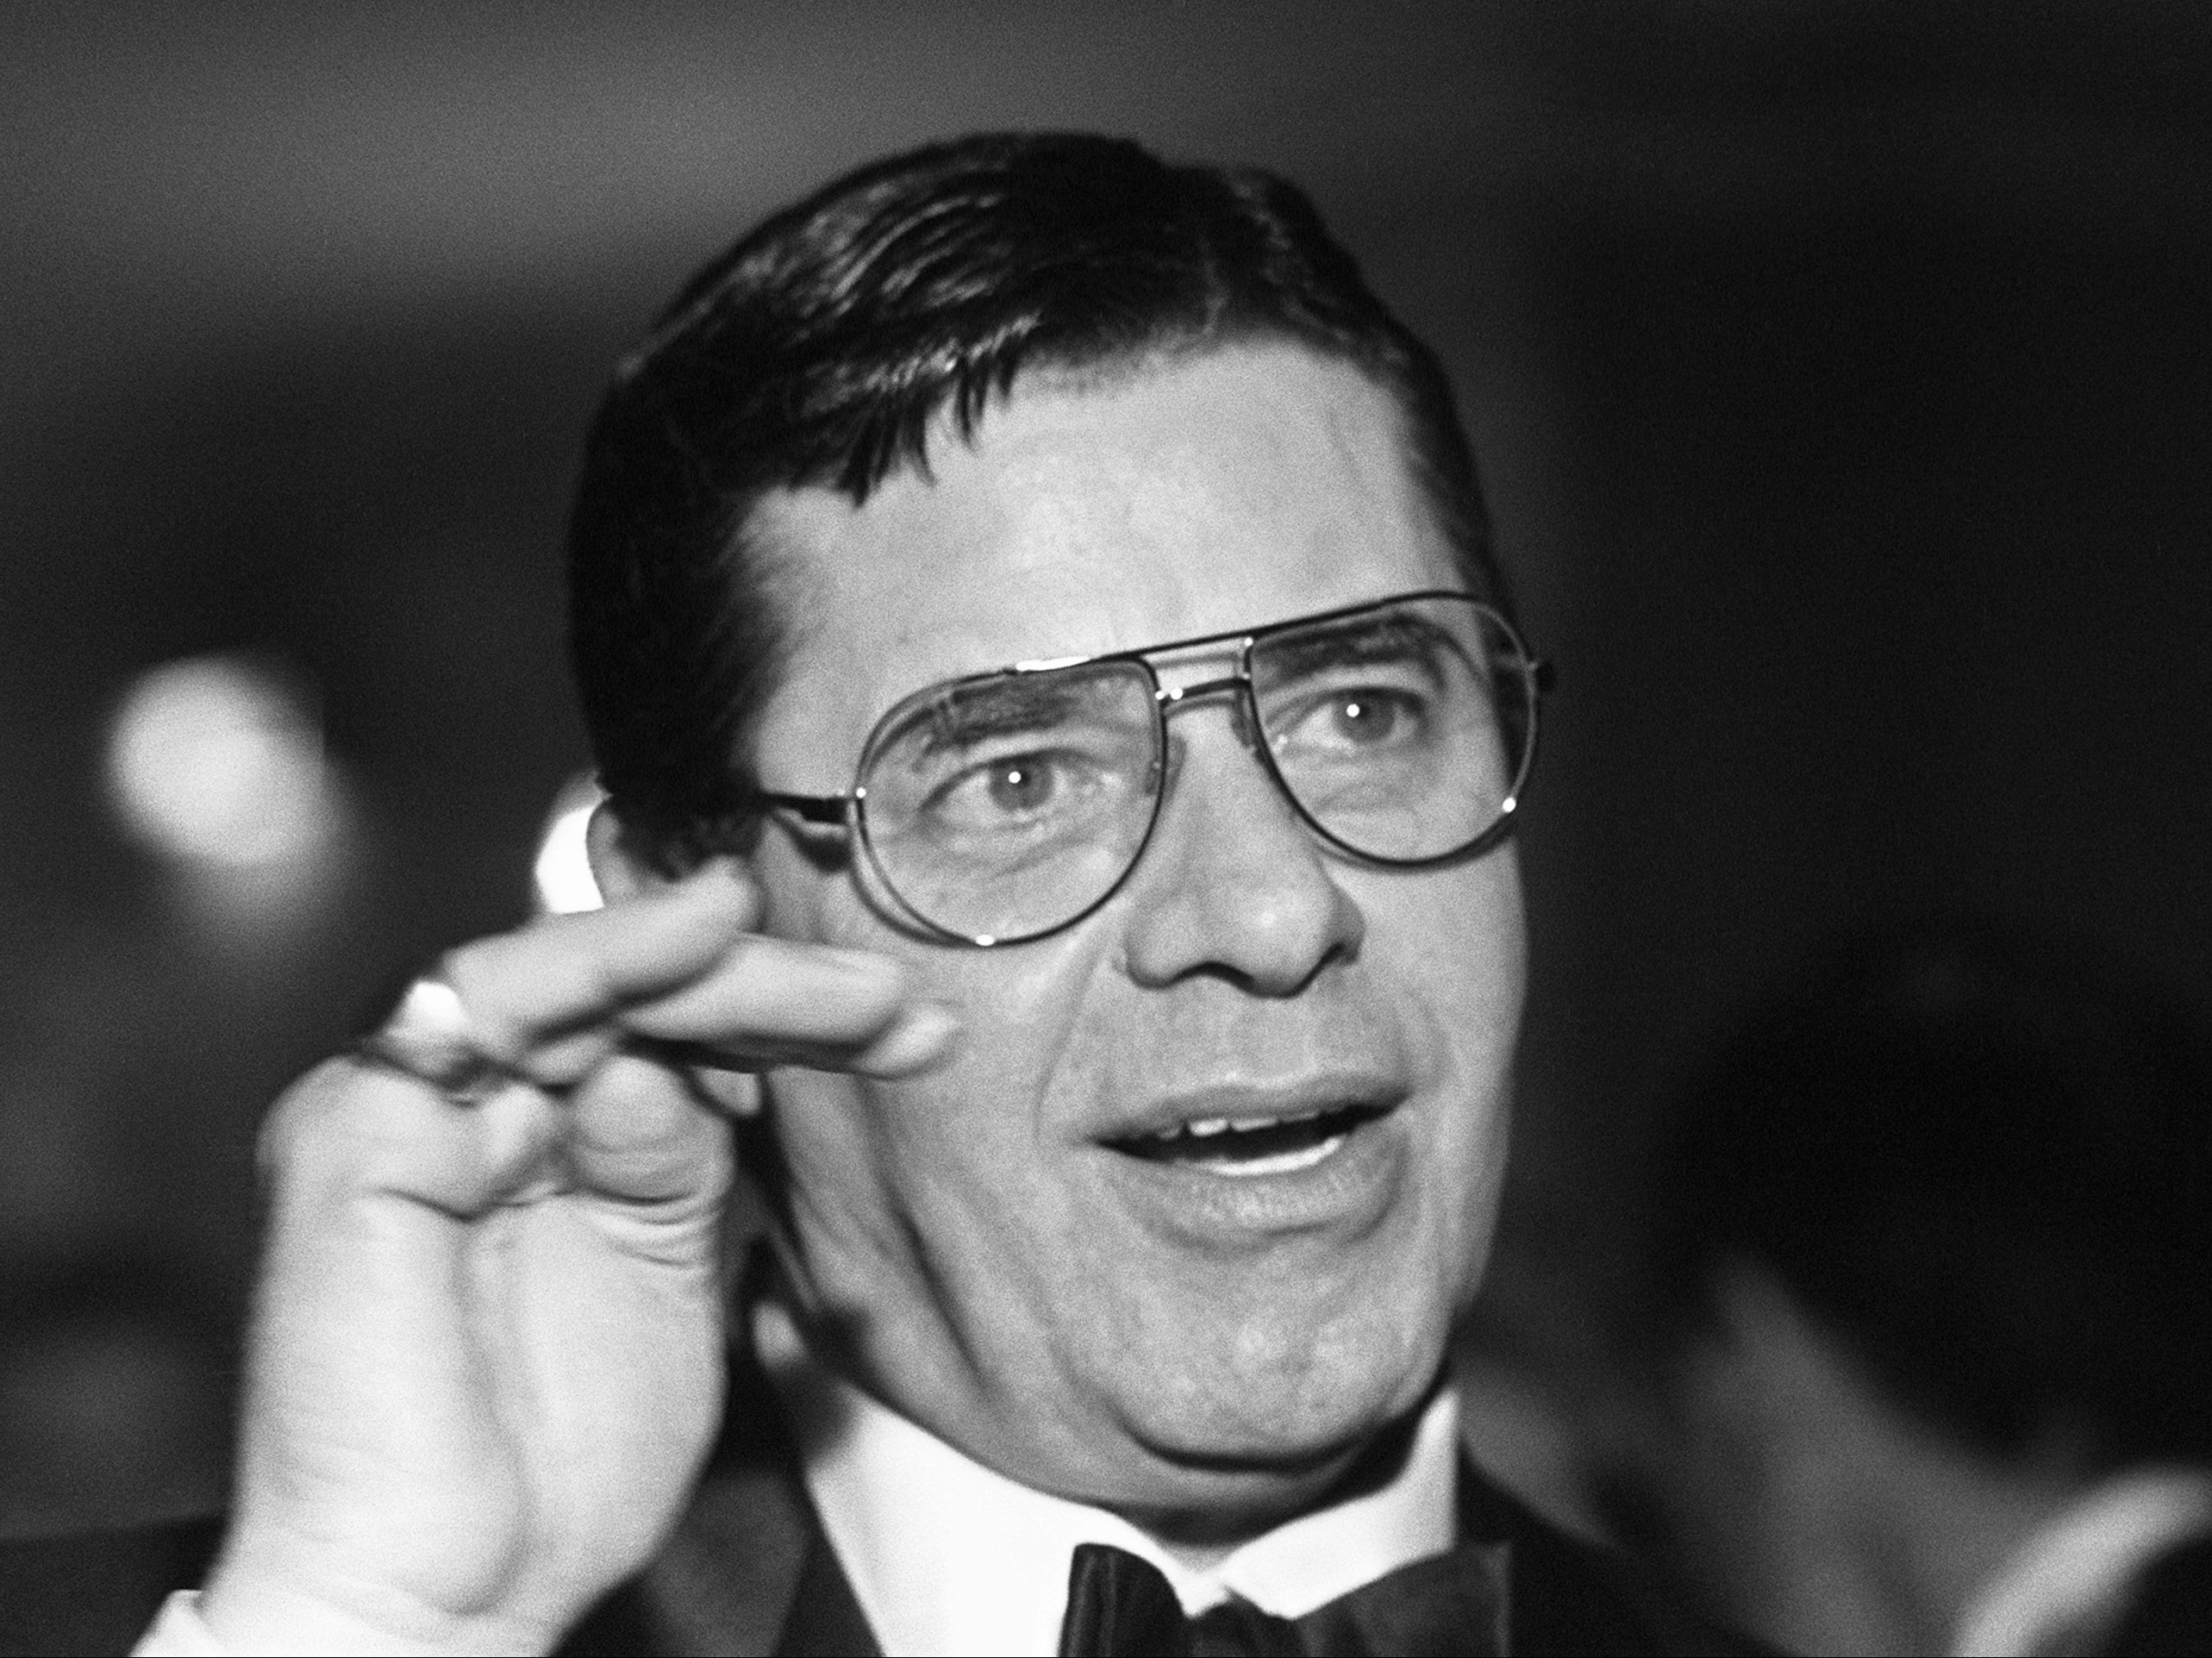 Jerry Lewis at a gala on 12 March 1984 in Paris